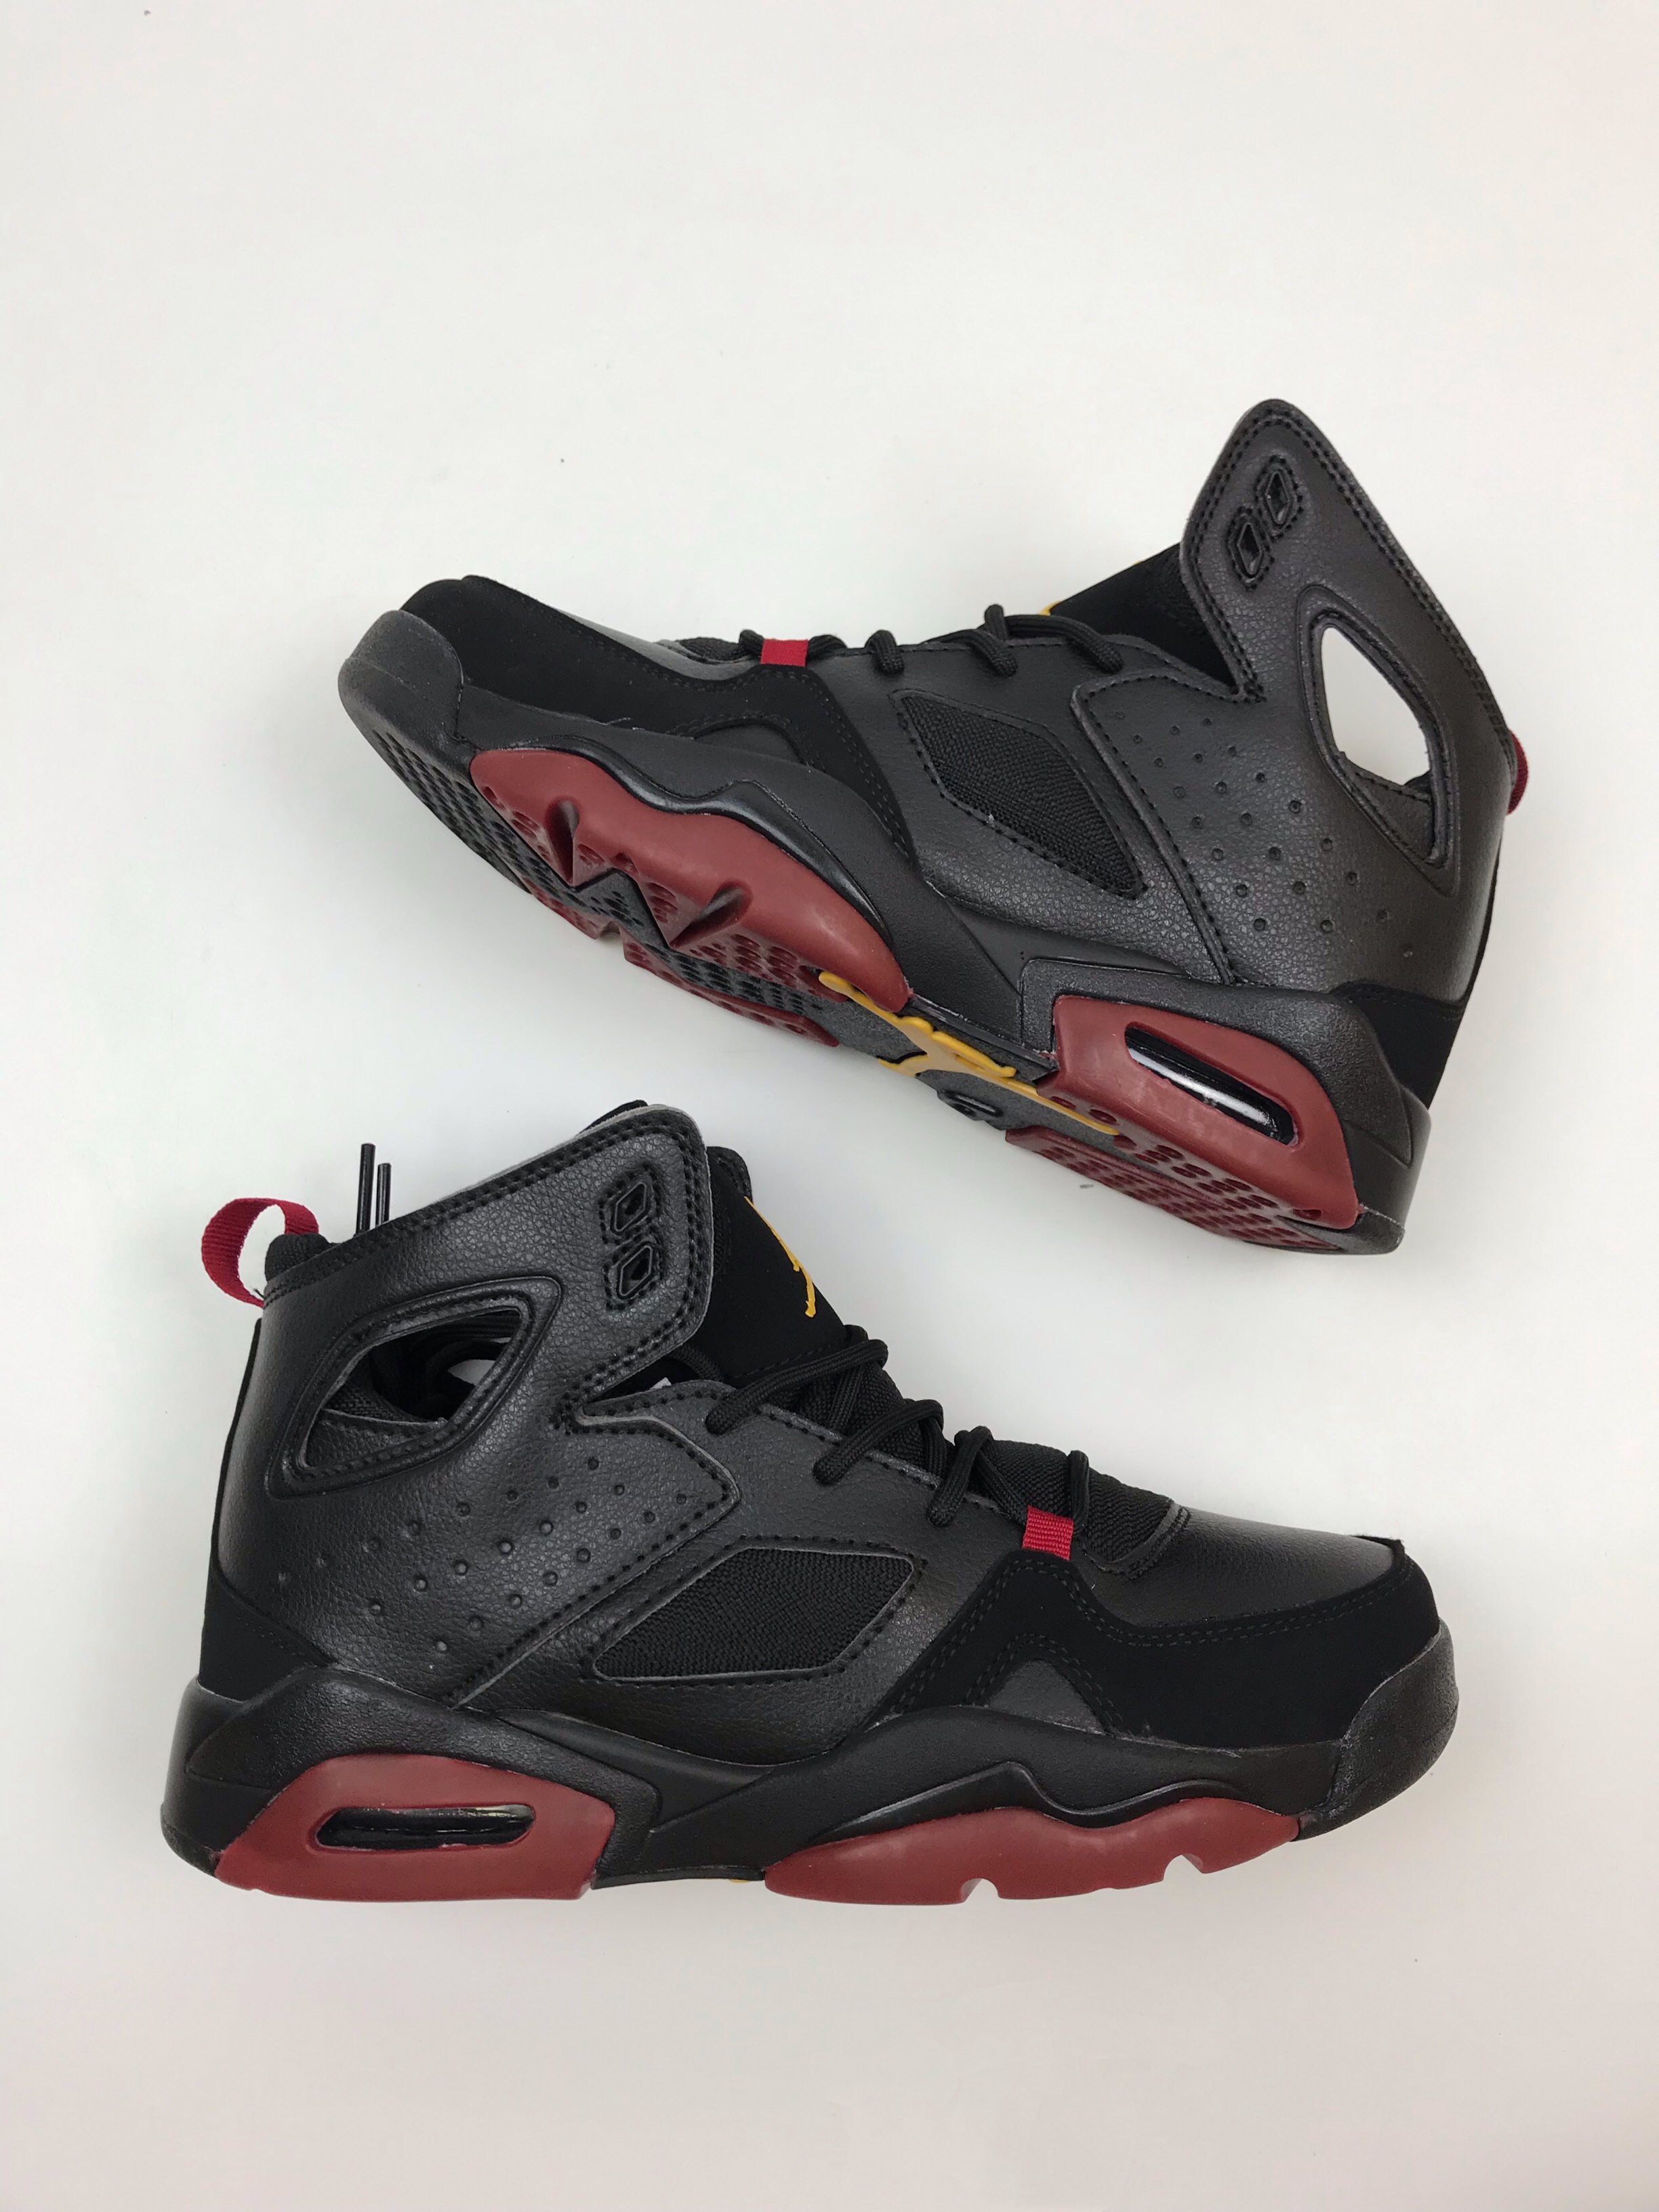 New Air Jordan 6 91 Black Wine Red Shoes - Click Image to Close